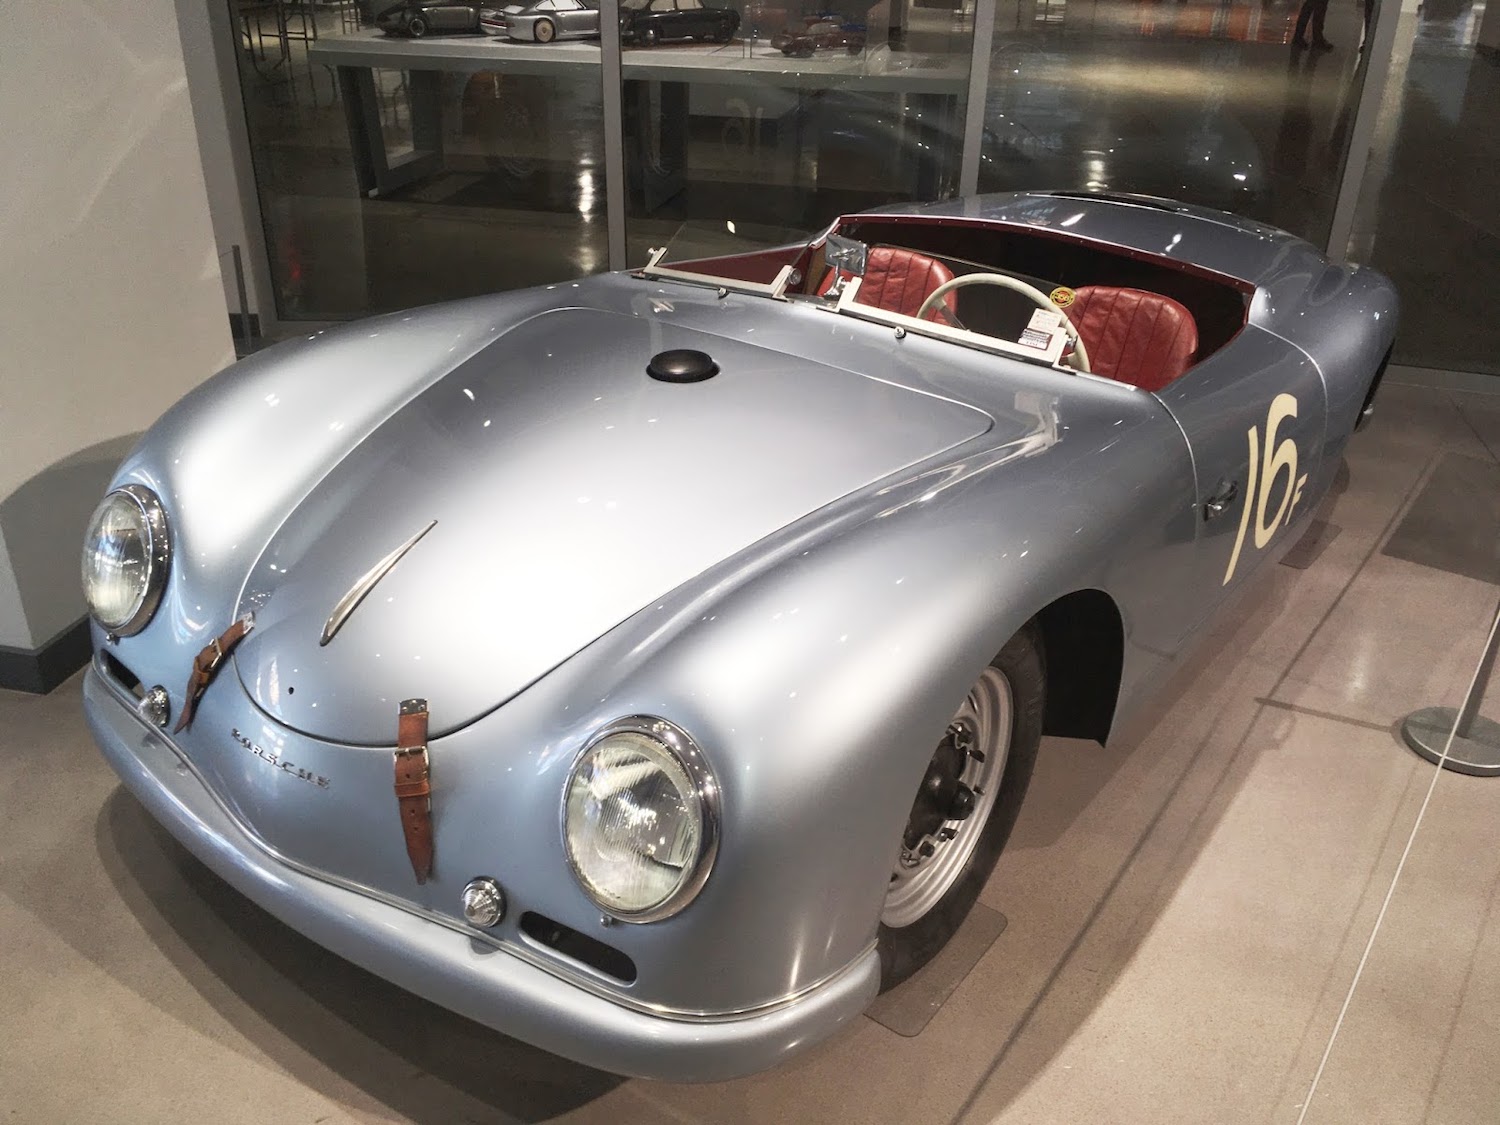 A Holy Grail of Porsche Specials: Found, Yes, in a Barn